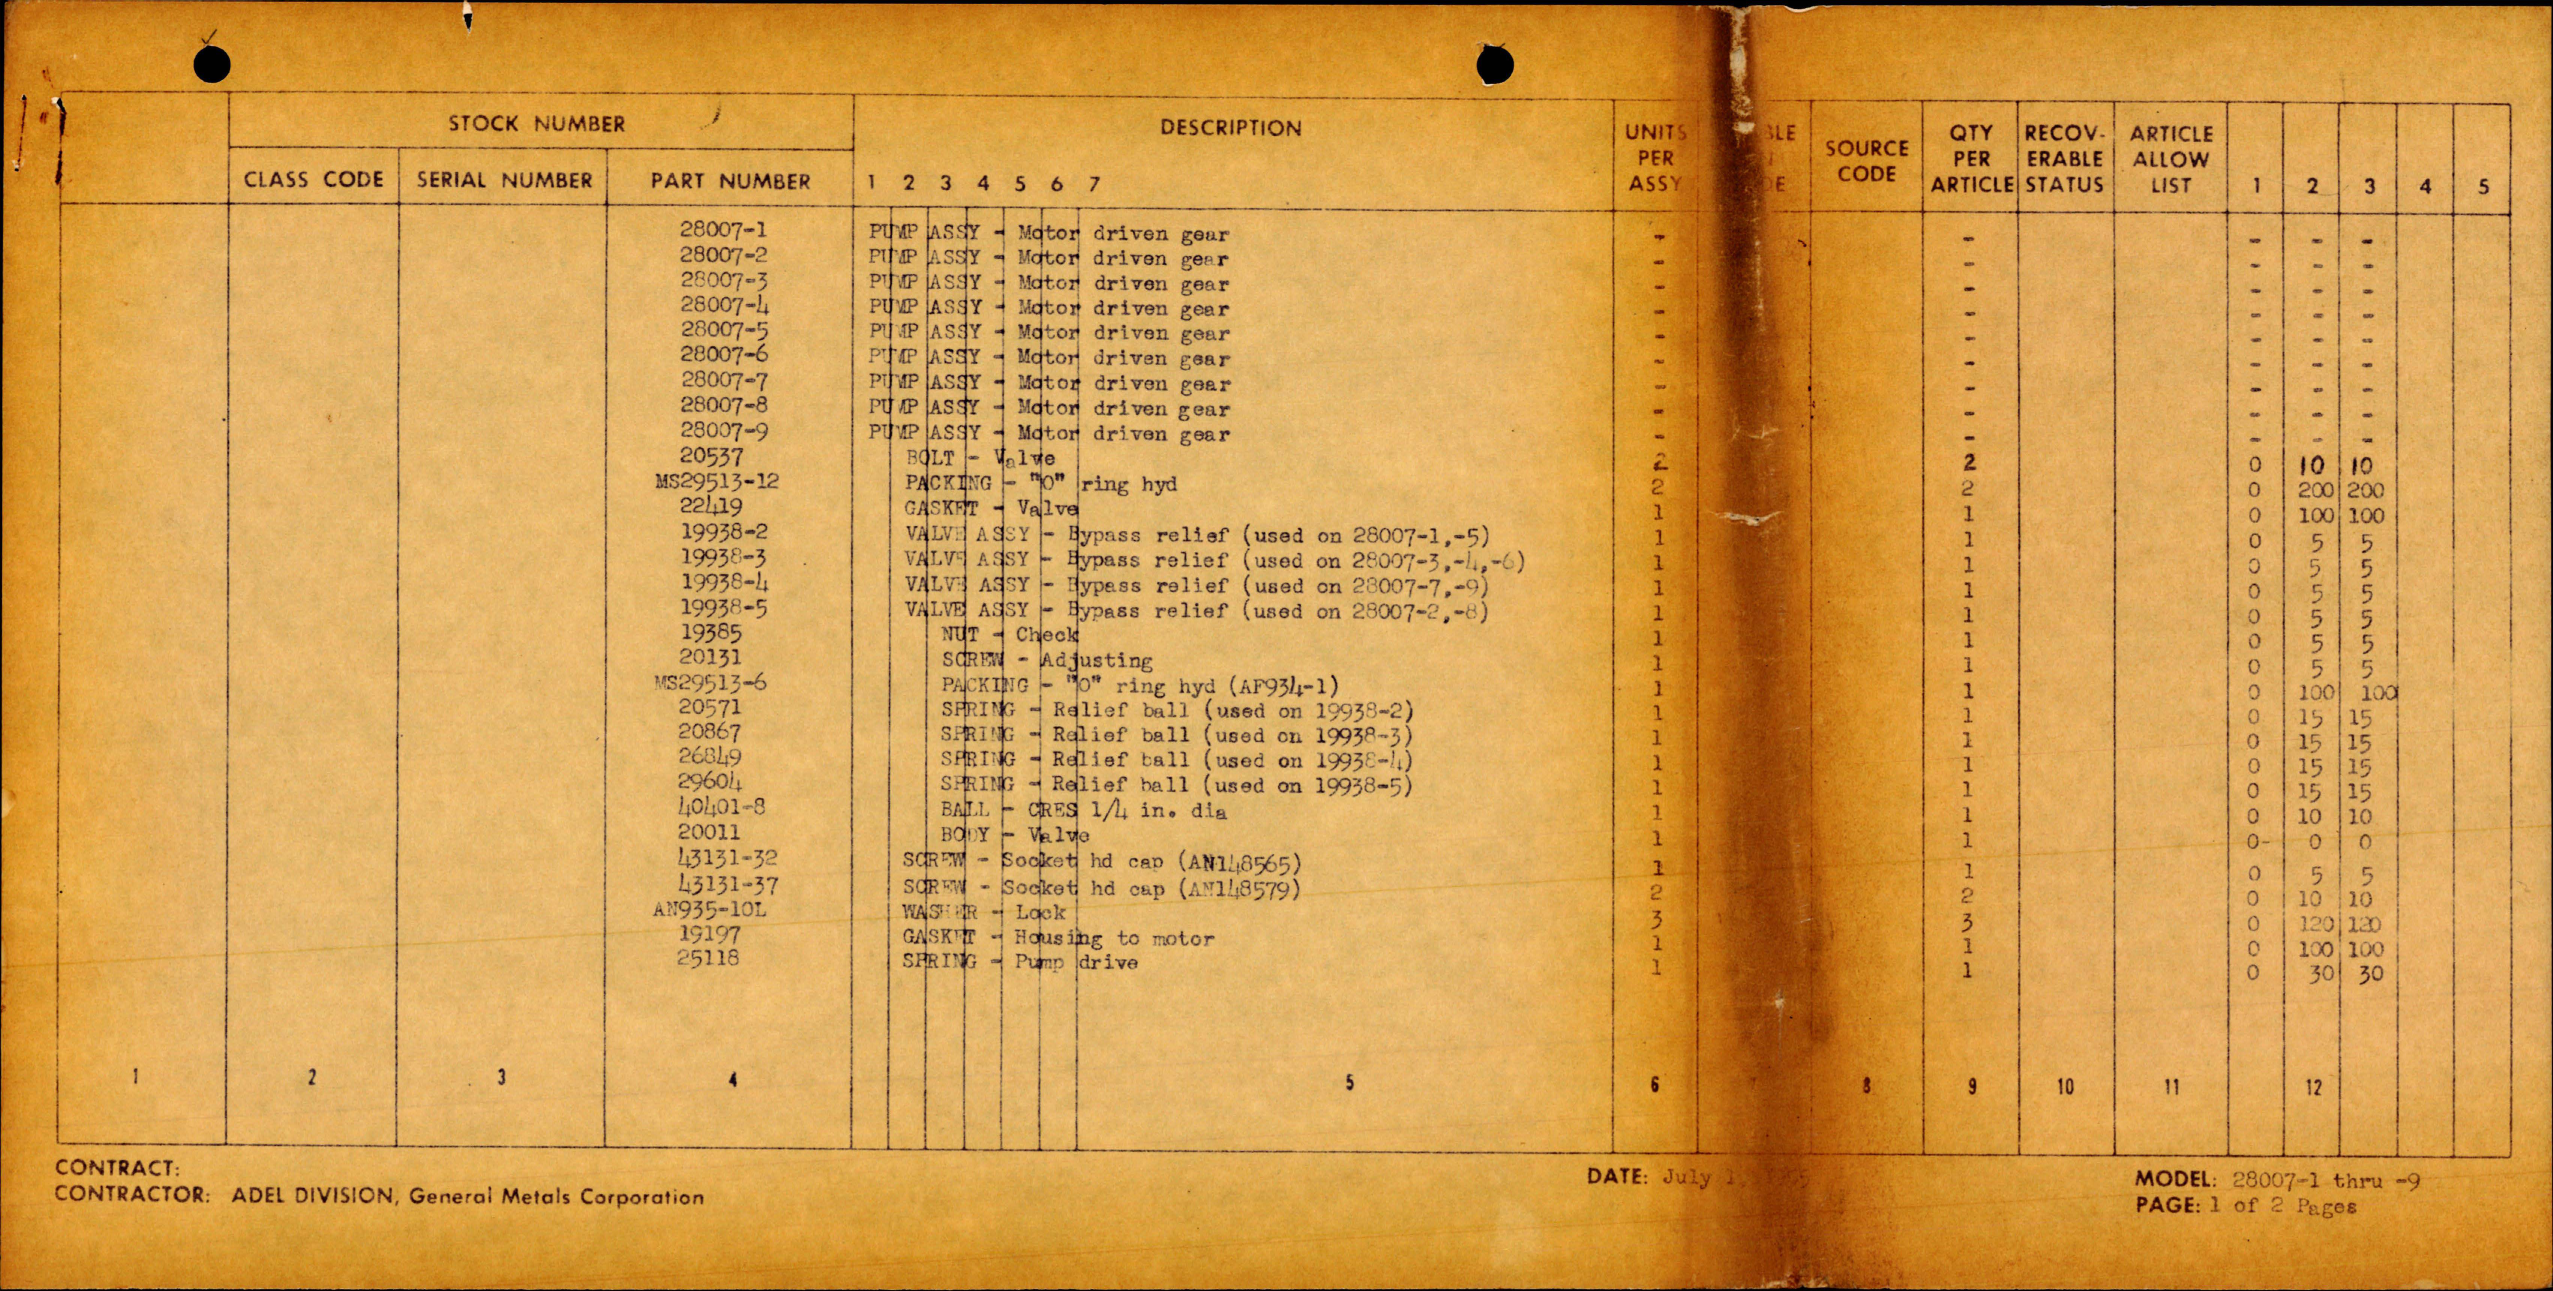 Sample page 1 from AirCorps Library document: Parts List for Anti-Icer Pump Assembly Motor Driven Gear - Models 28007 Series 